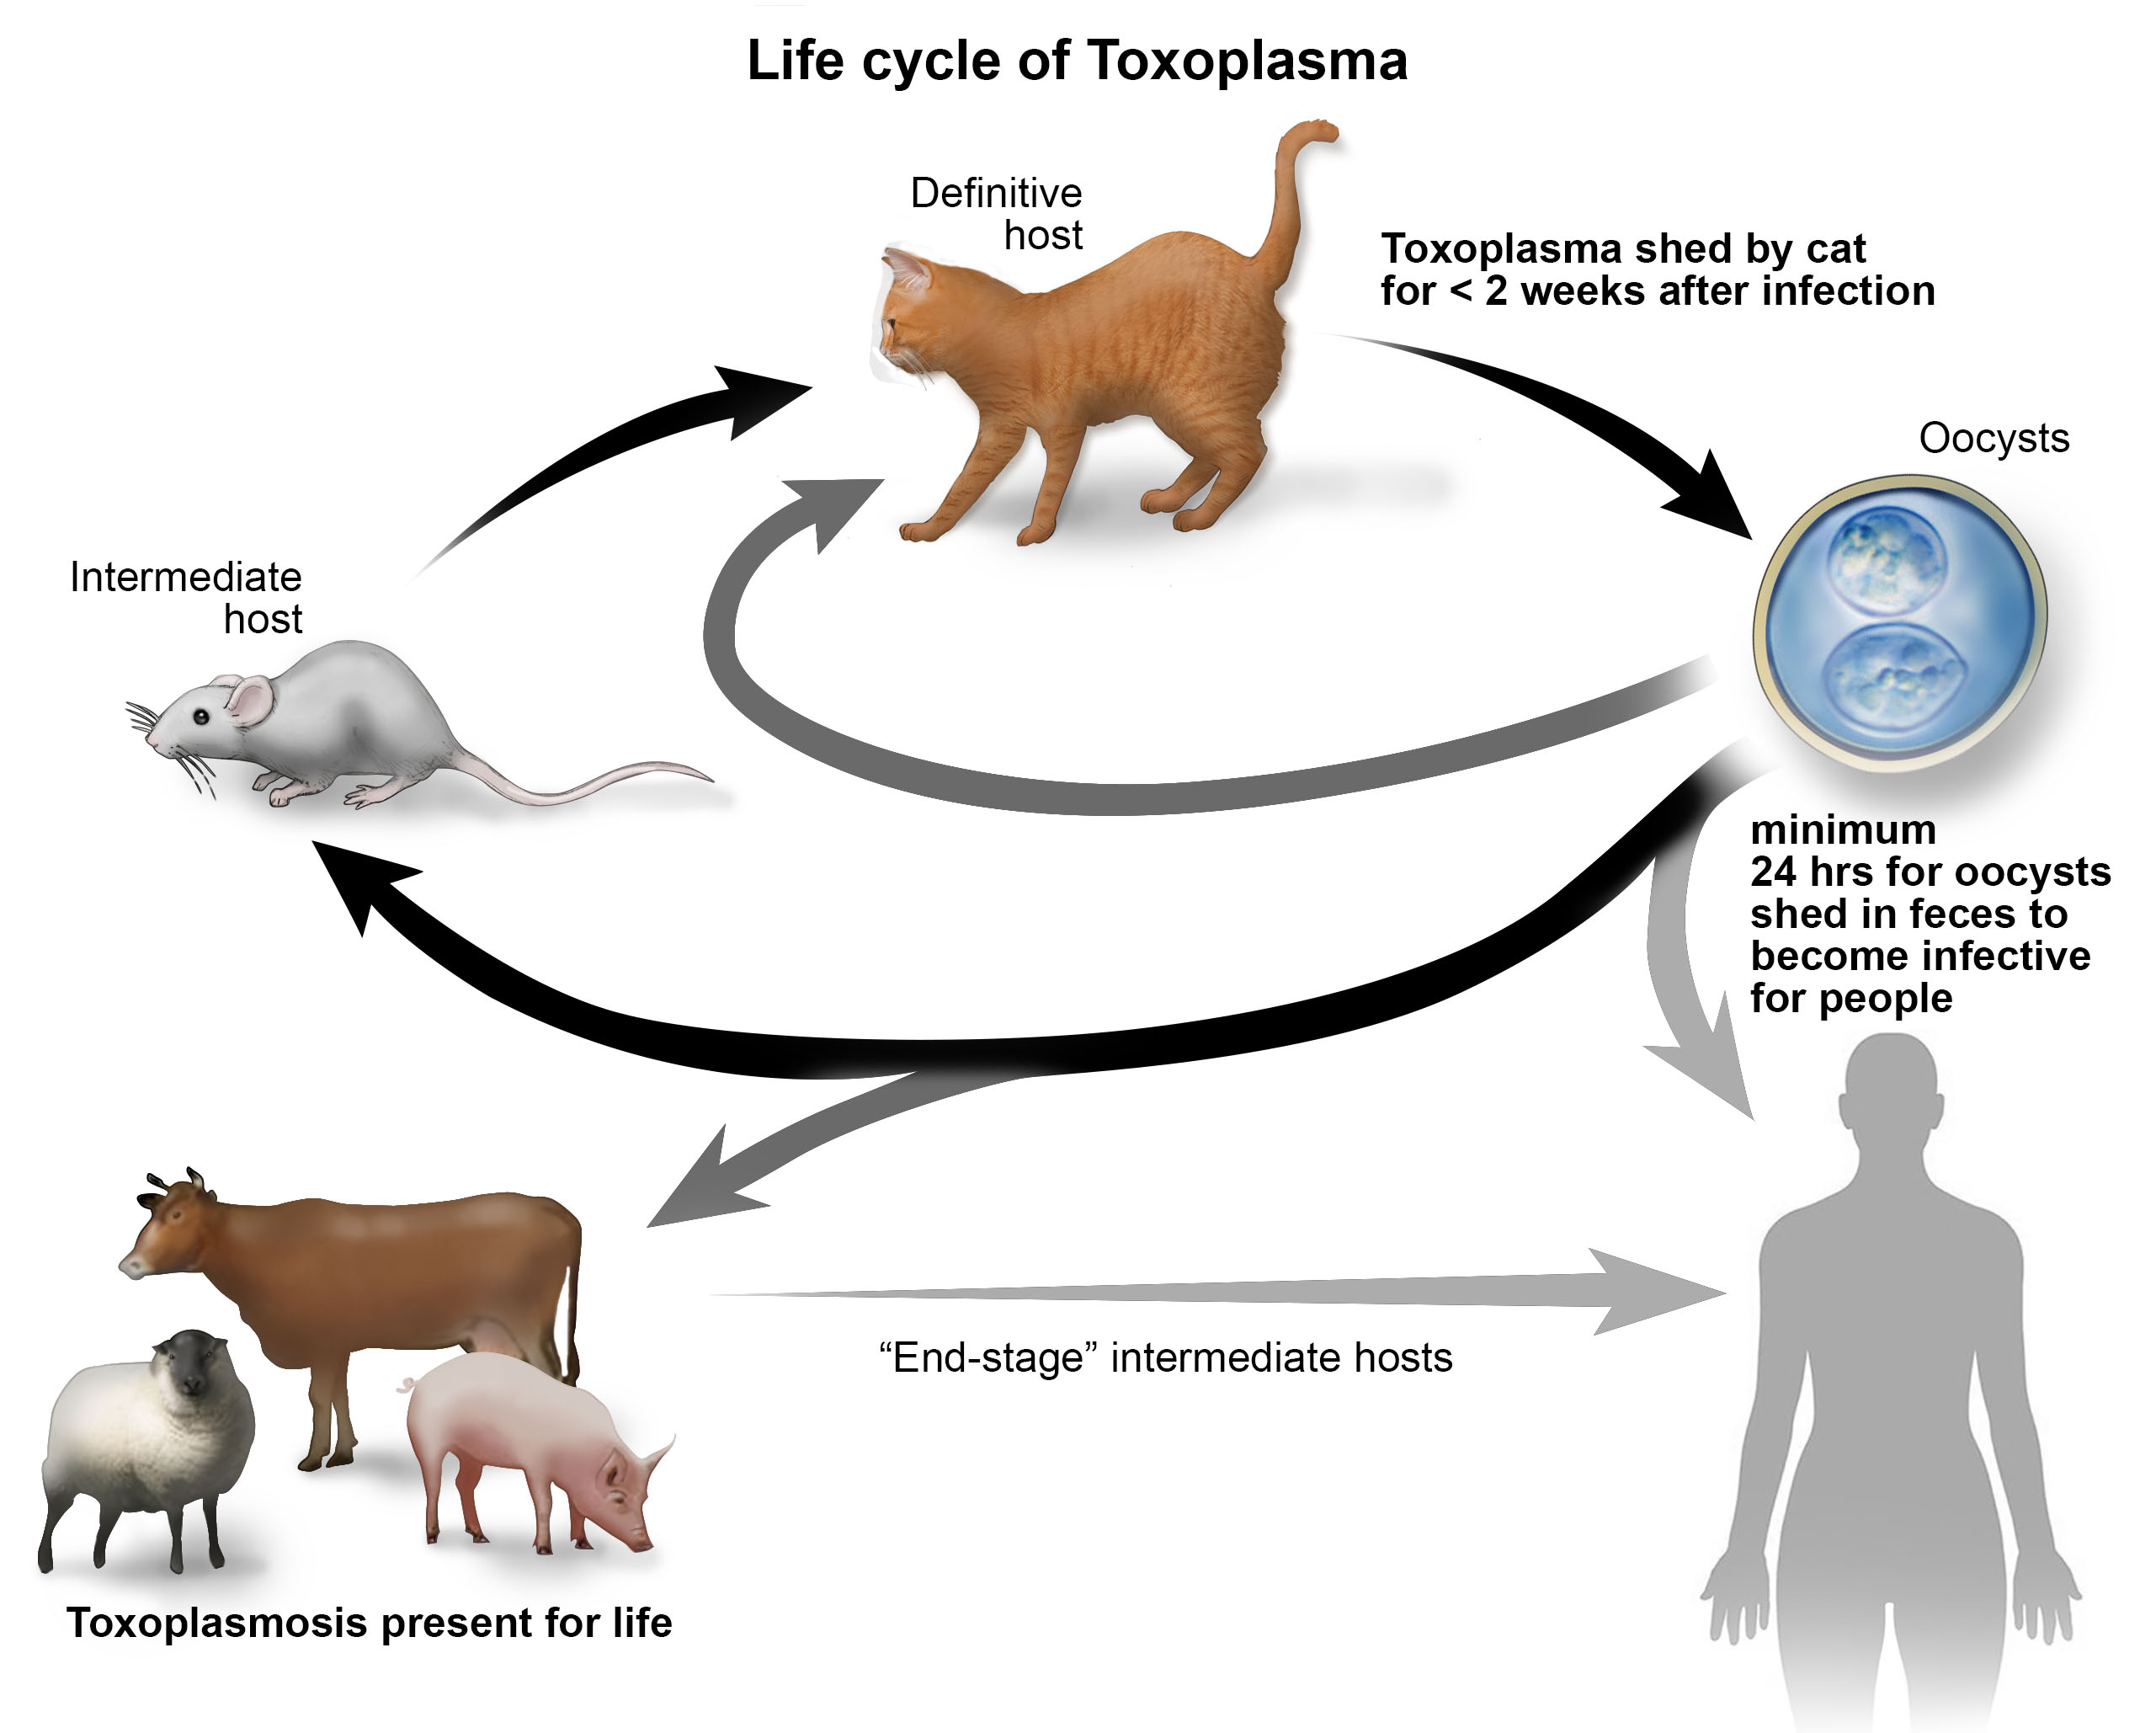 infographic showing the life cycle of toxoplasmosis and how it moves from host to host